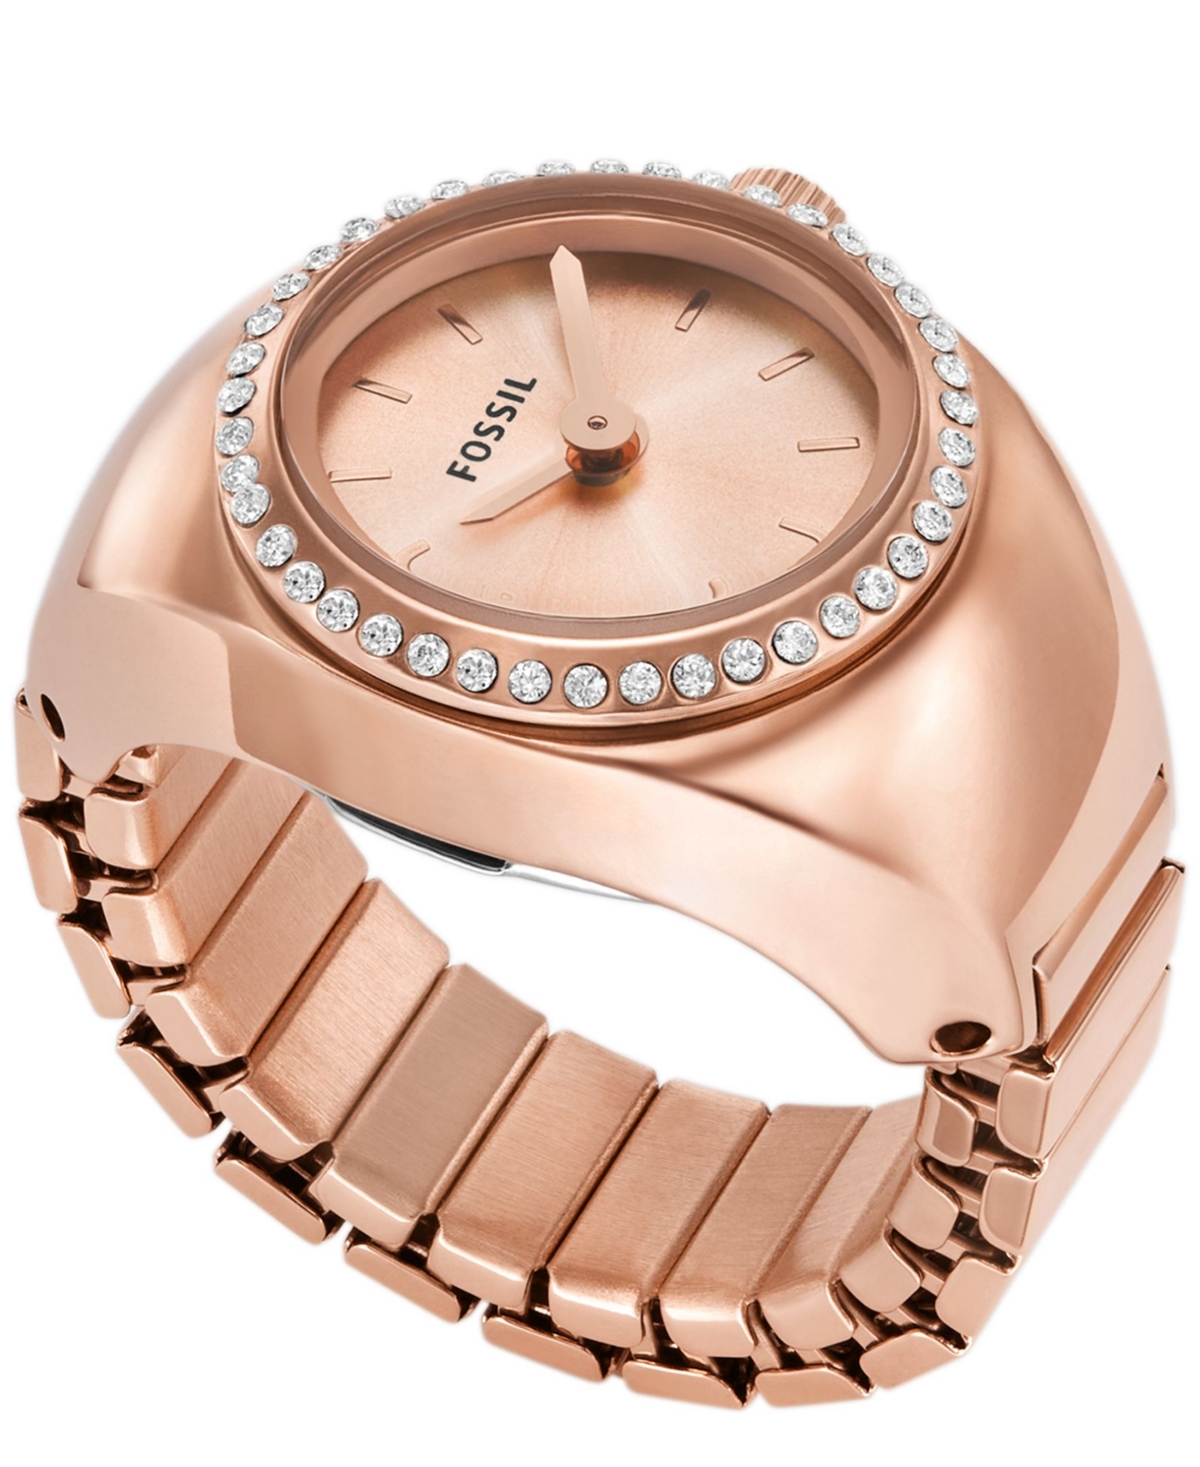 Fossil Women's Watch Ring Two-hand Rose Gold-tone Stainless Steel 15mm In Rose Gold Tone